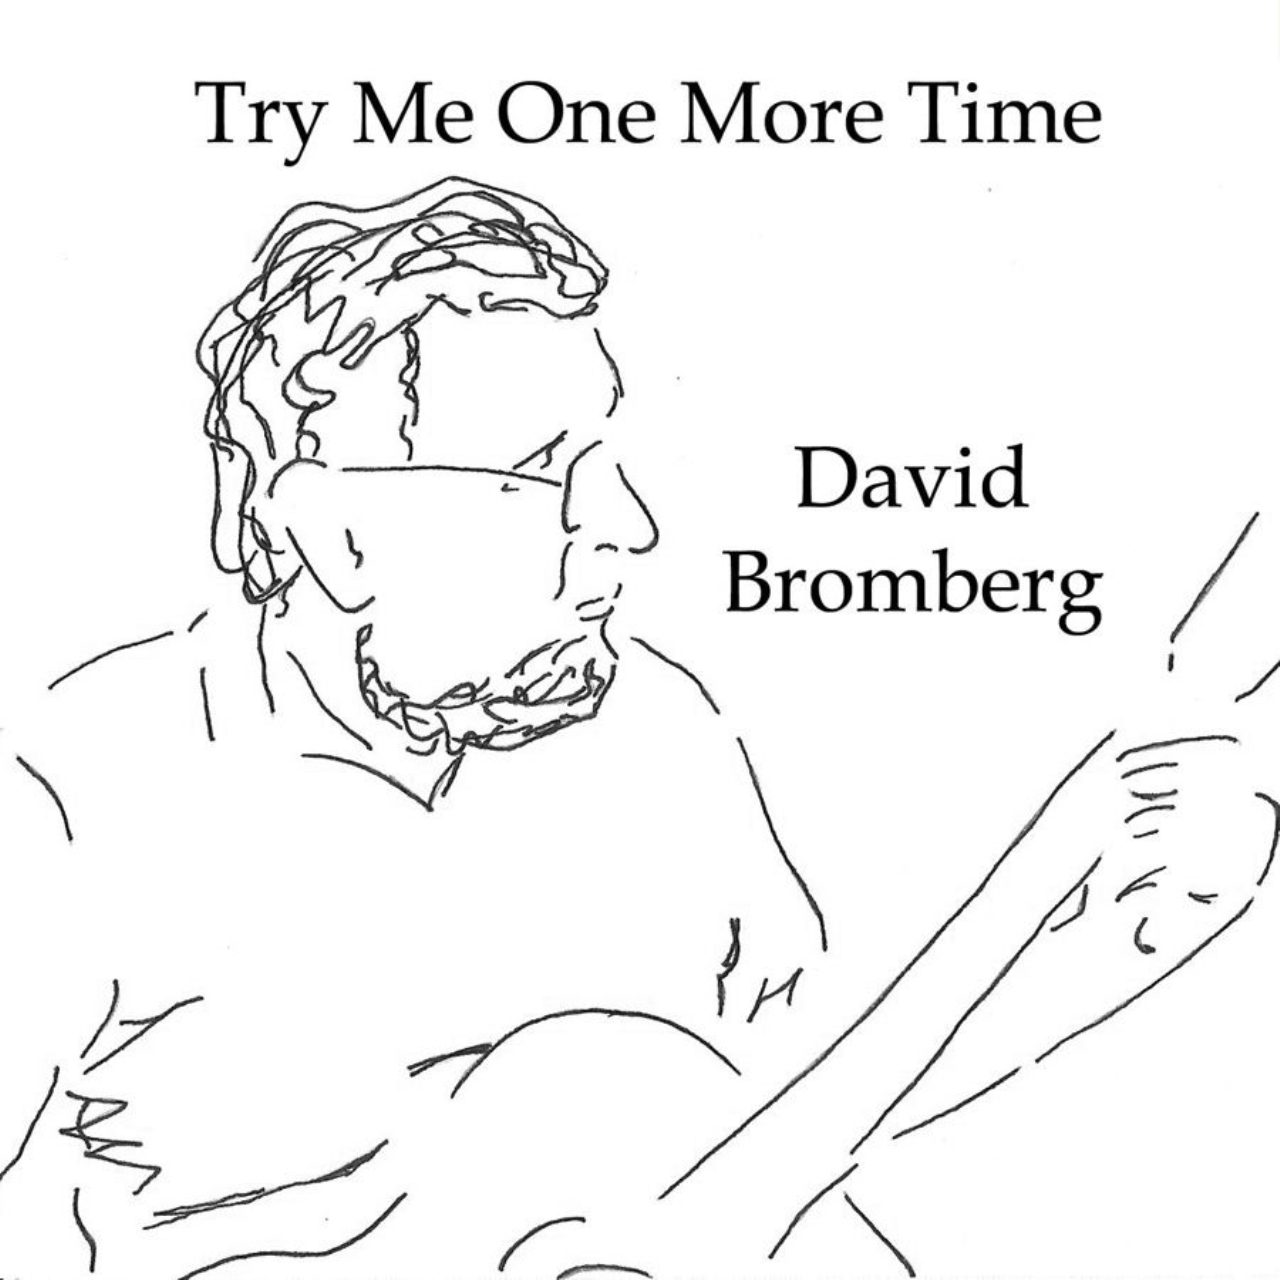 David Bromberg - Try Me One More Time cover album